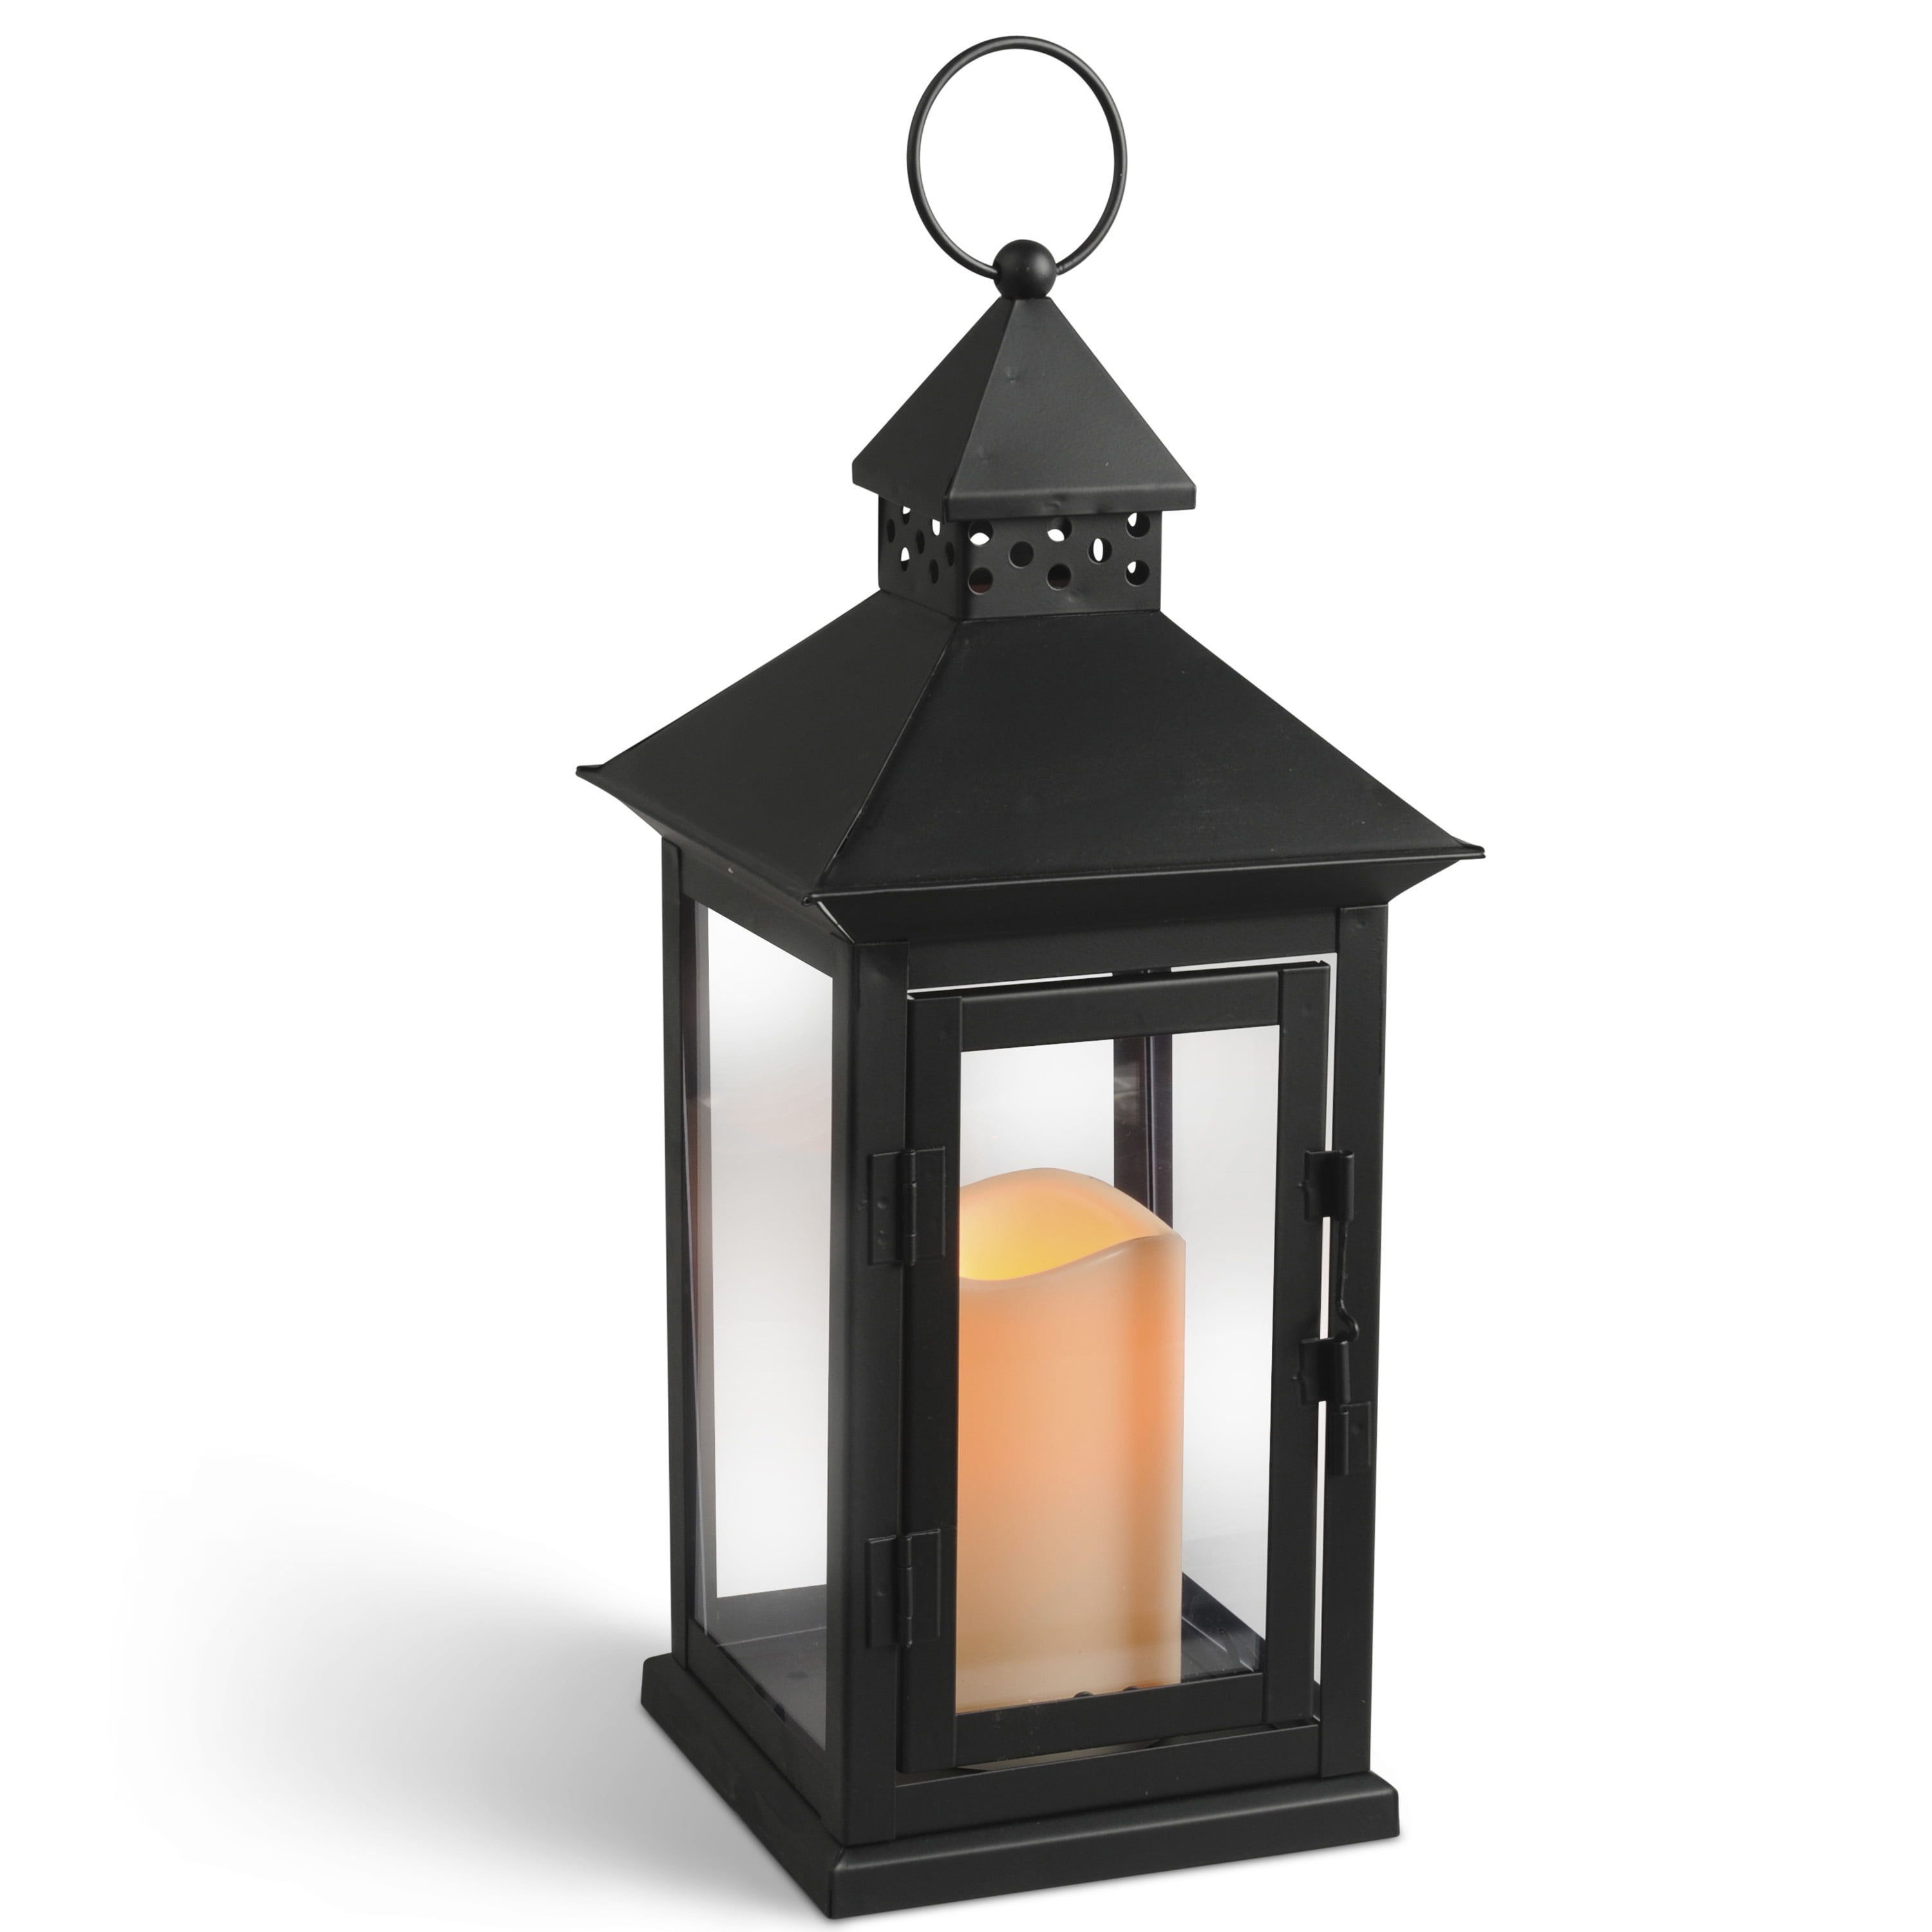 £5.99 F/POST AZUMA INDOOR/OUTDOOR LANTERN WITH 2 REMOVABLE TORCHES TO CLEAR! 